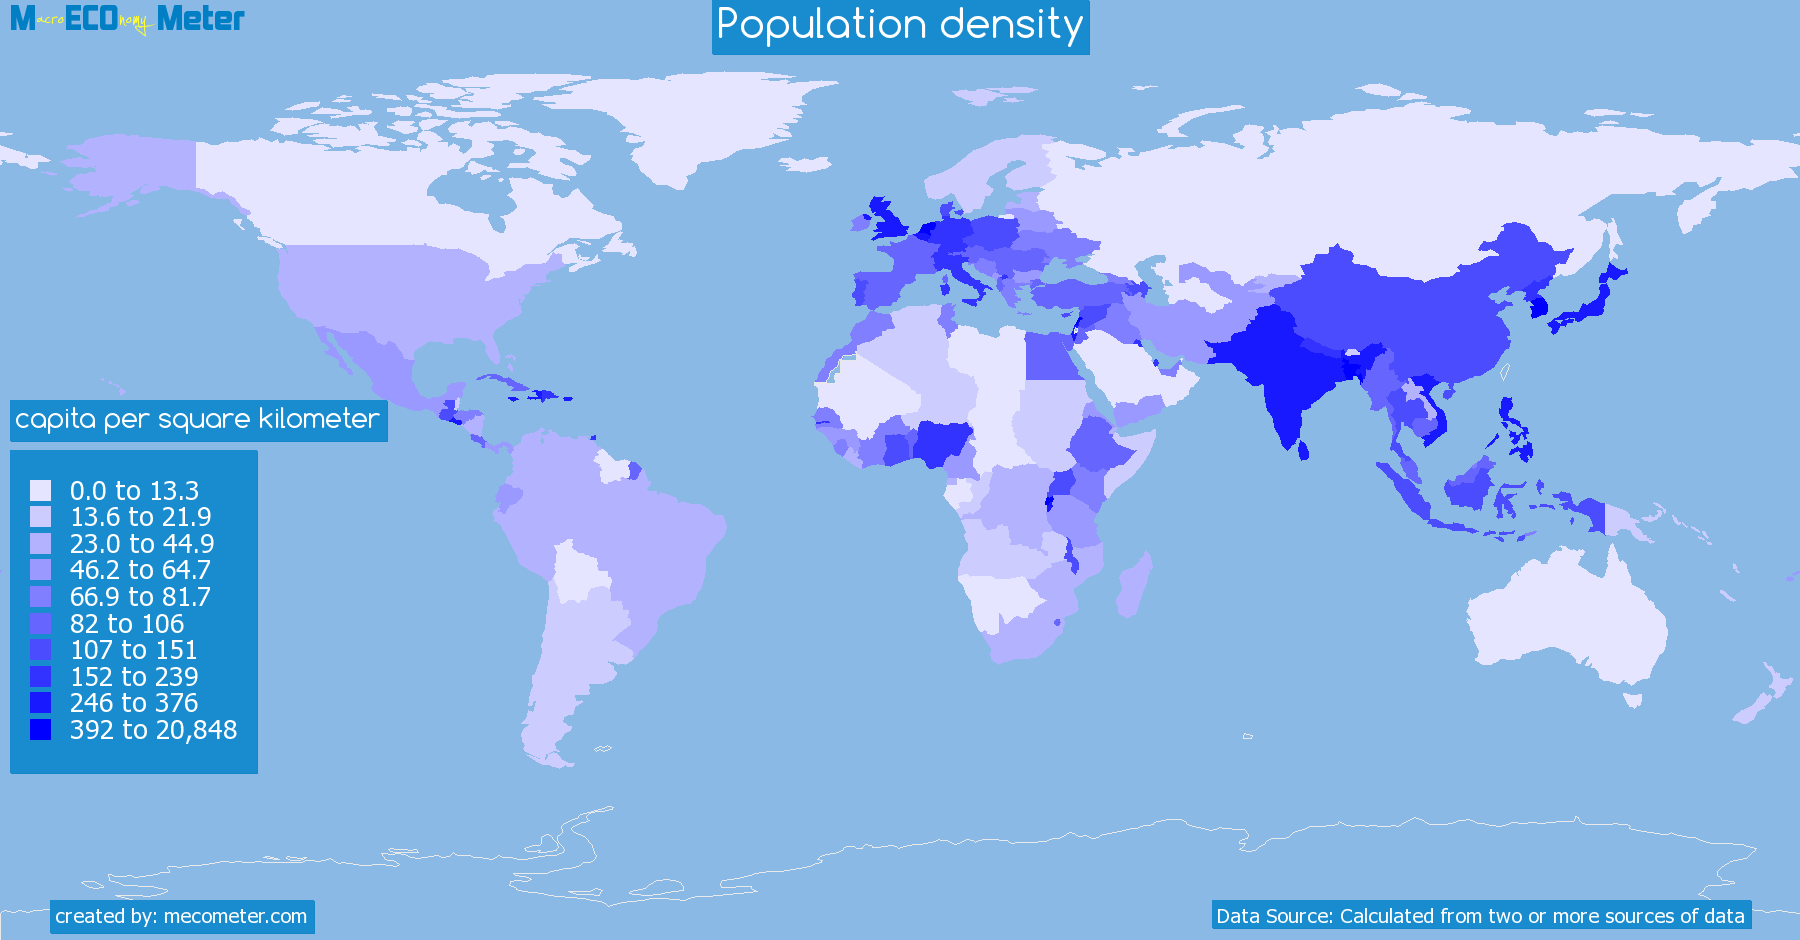 Worldmap of all countries colored to reflect the values of Population density